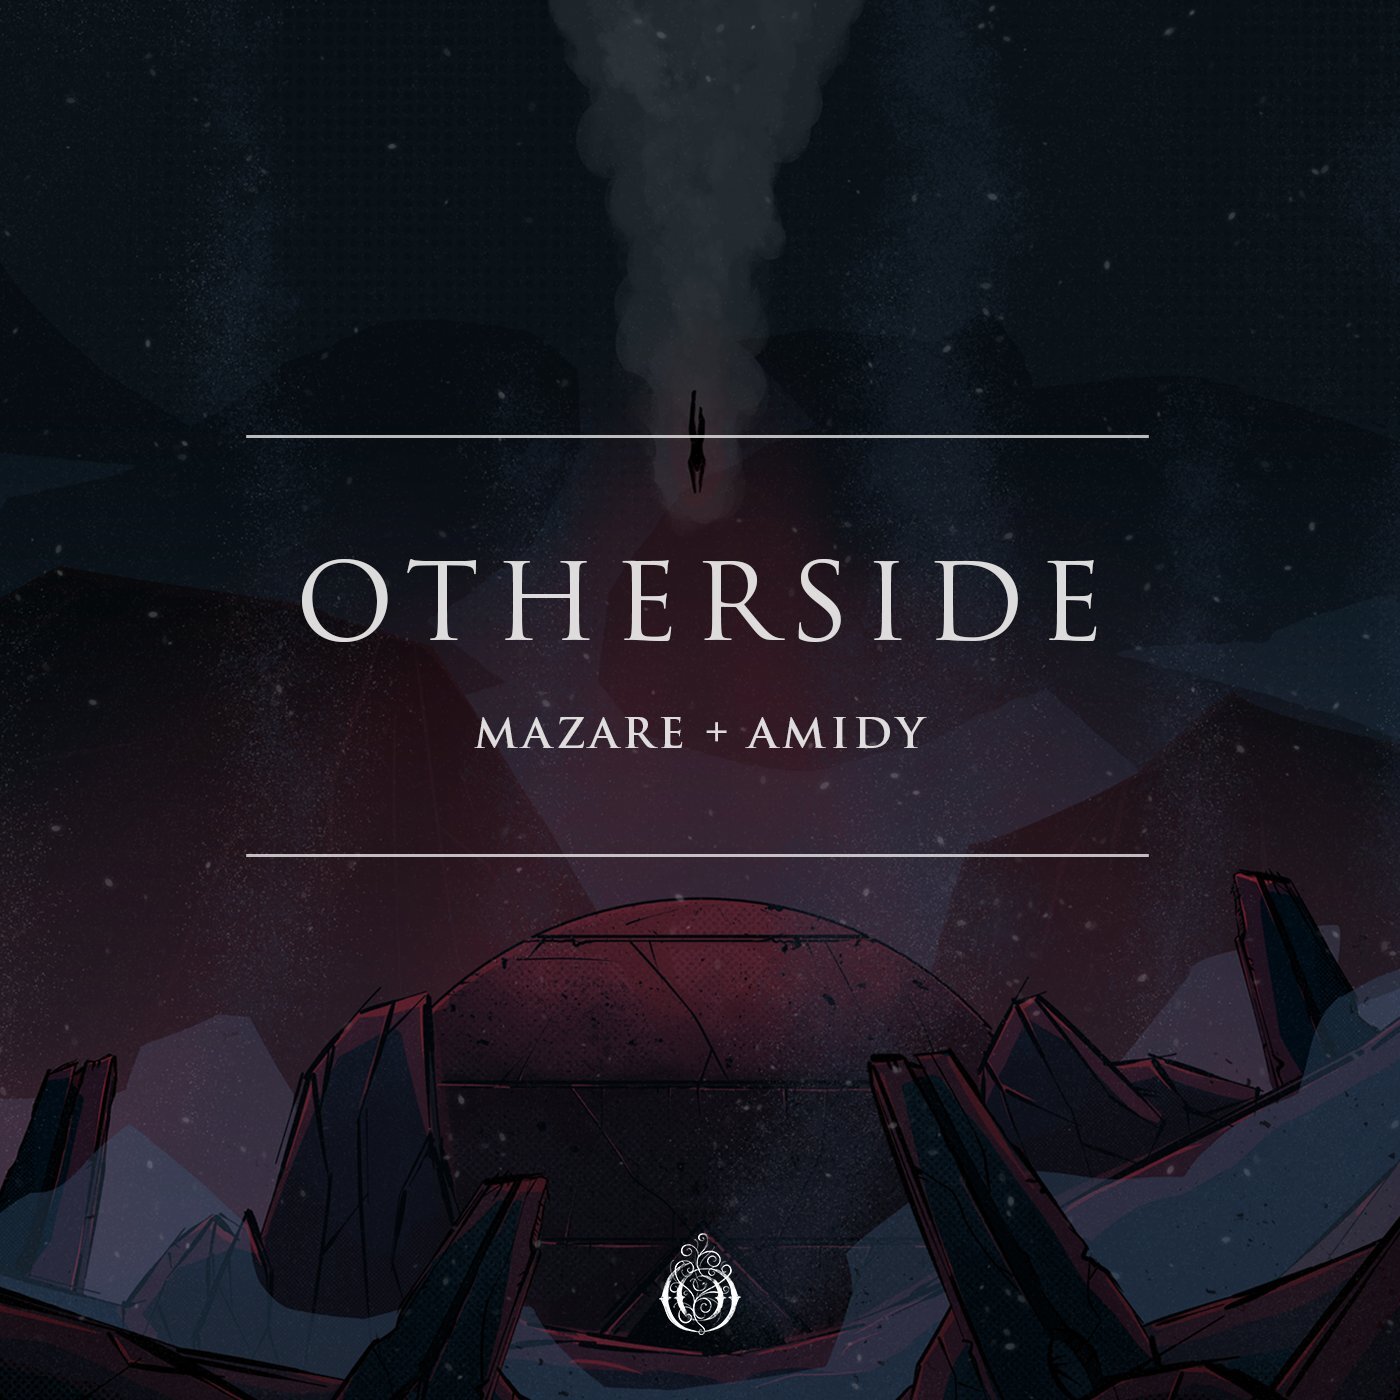 Mazare Pairs Up With AMIDY To Tease Upcoming EP With ‘Otherside’ Single